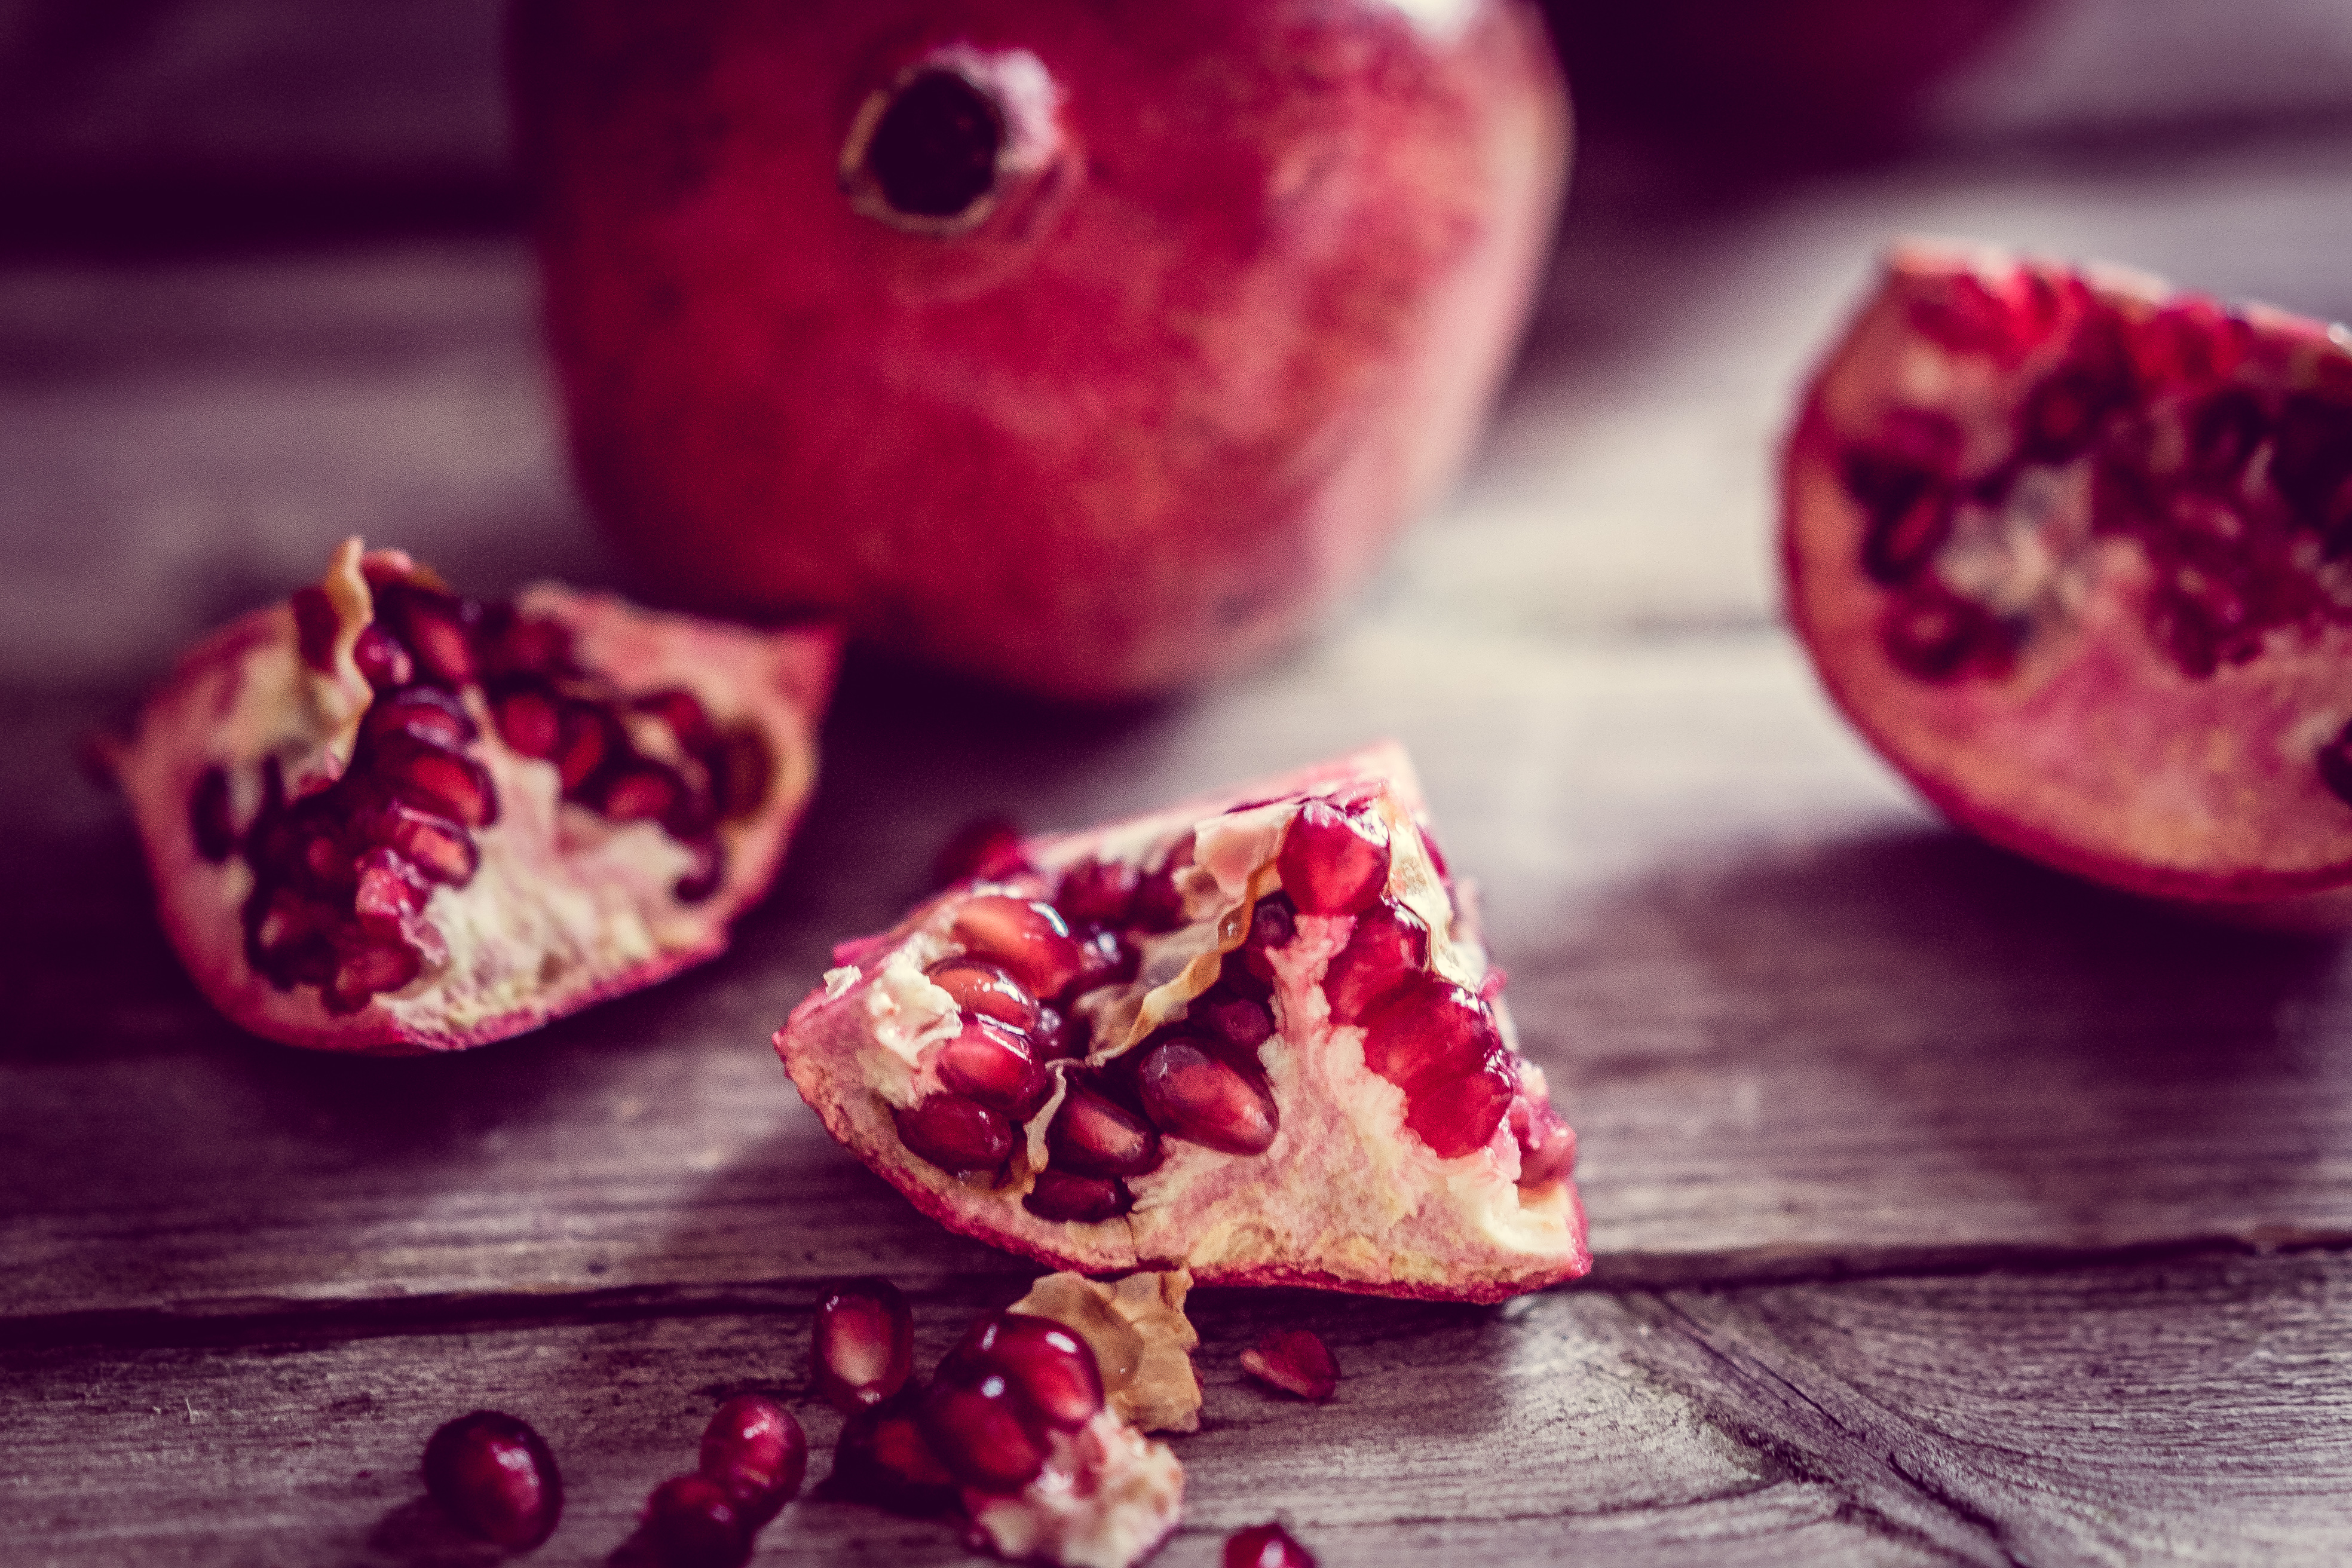 Pomegranate on wooden background